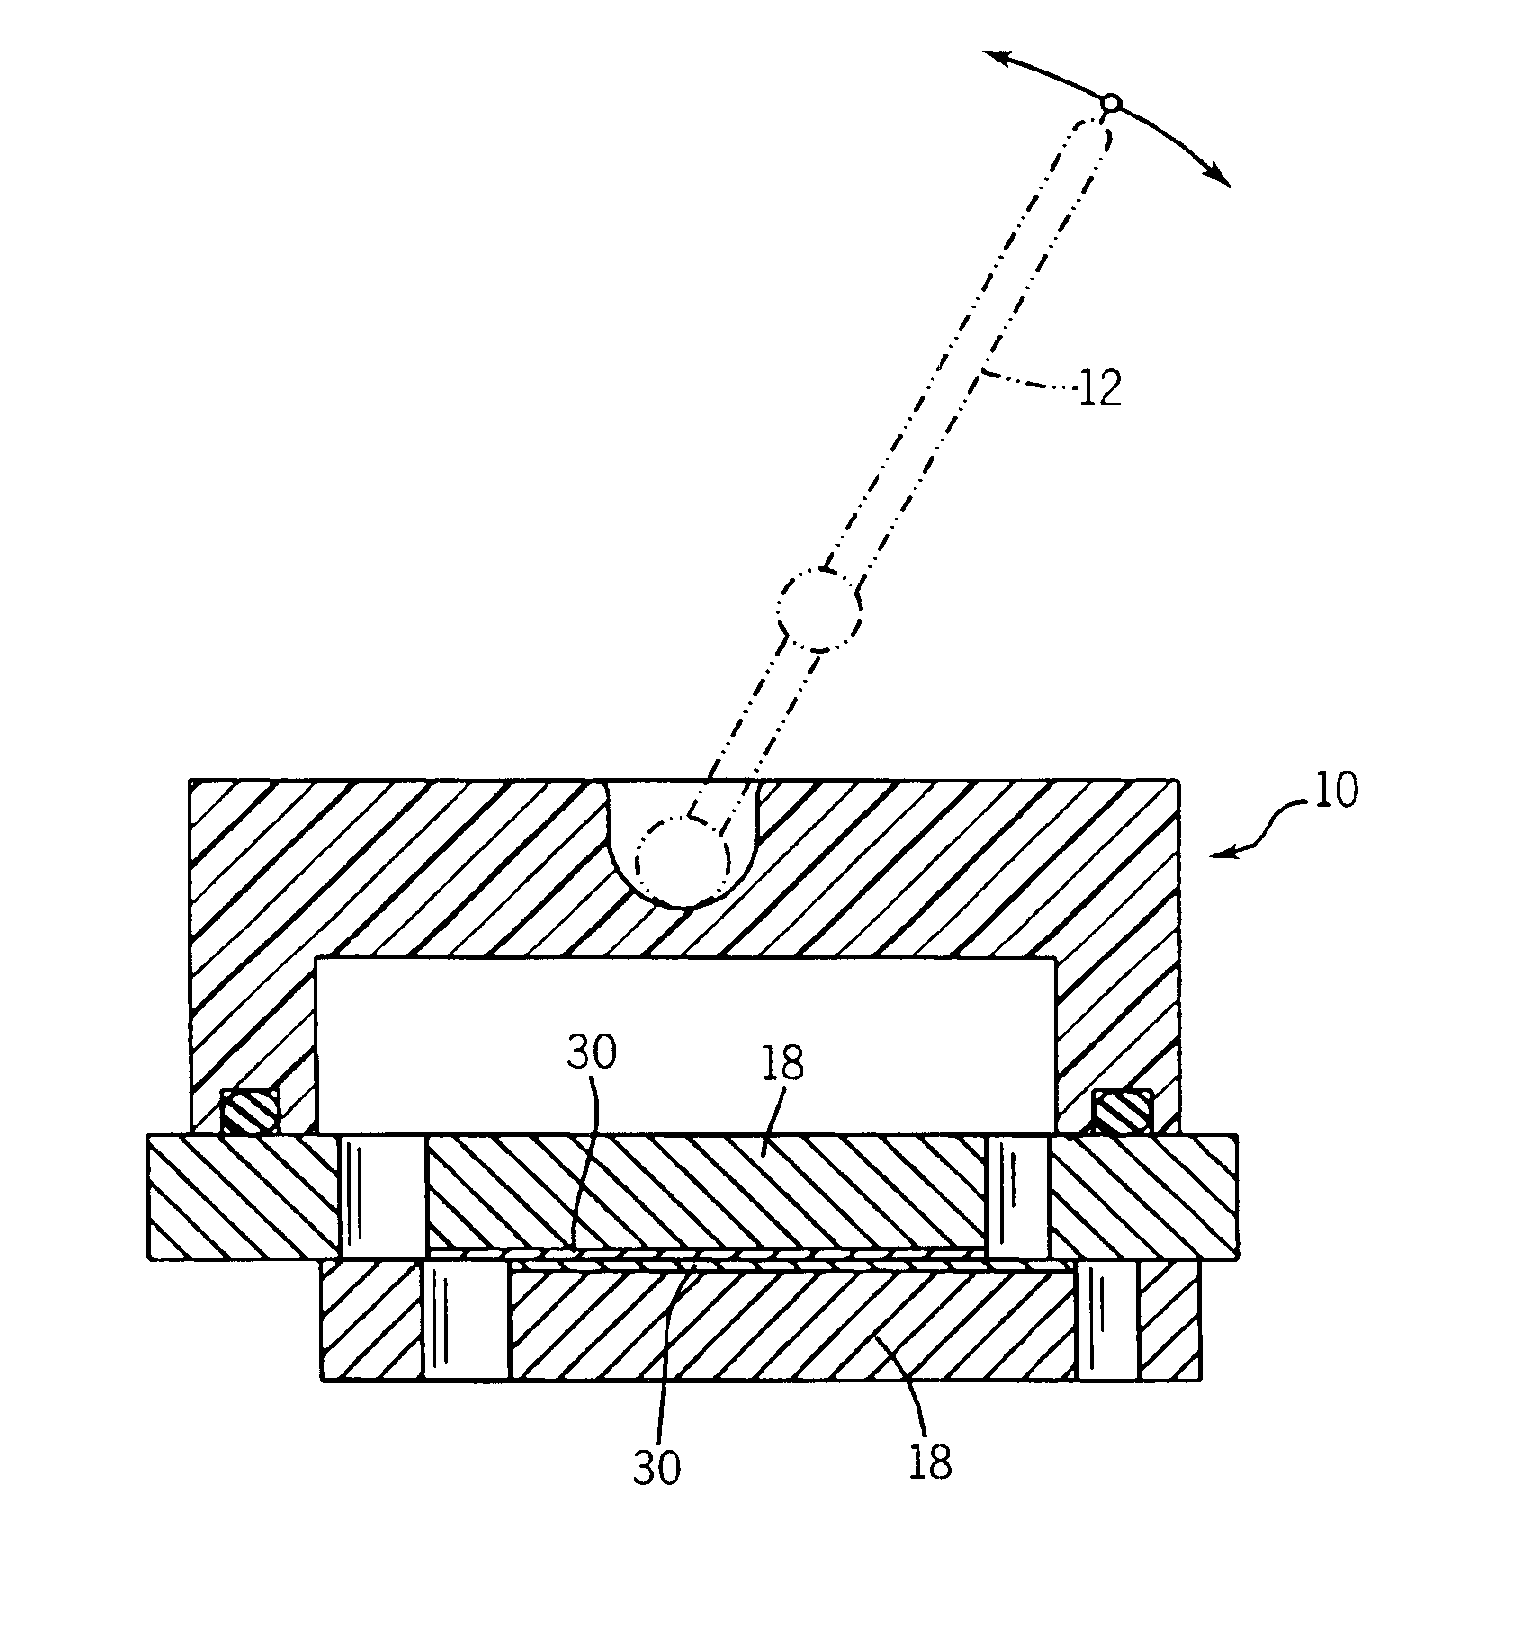 Valve component with multiple surface layers